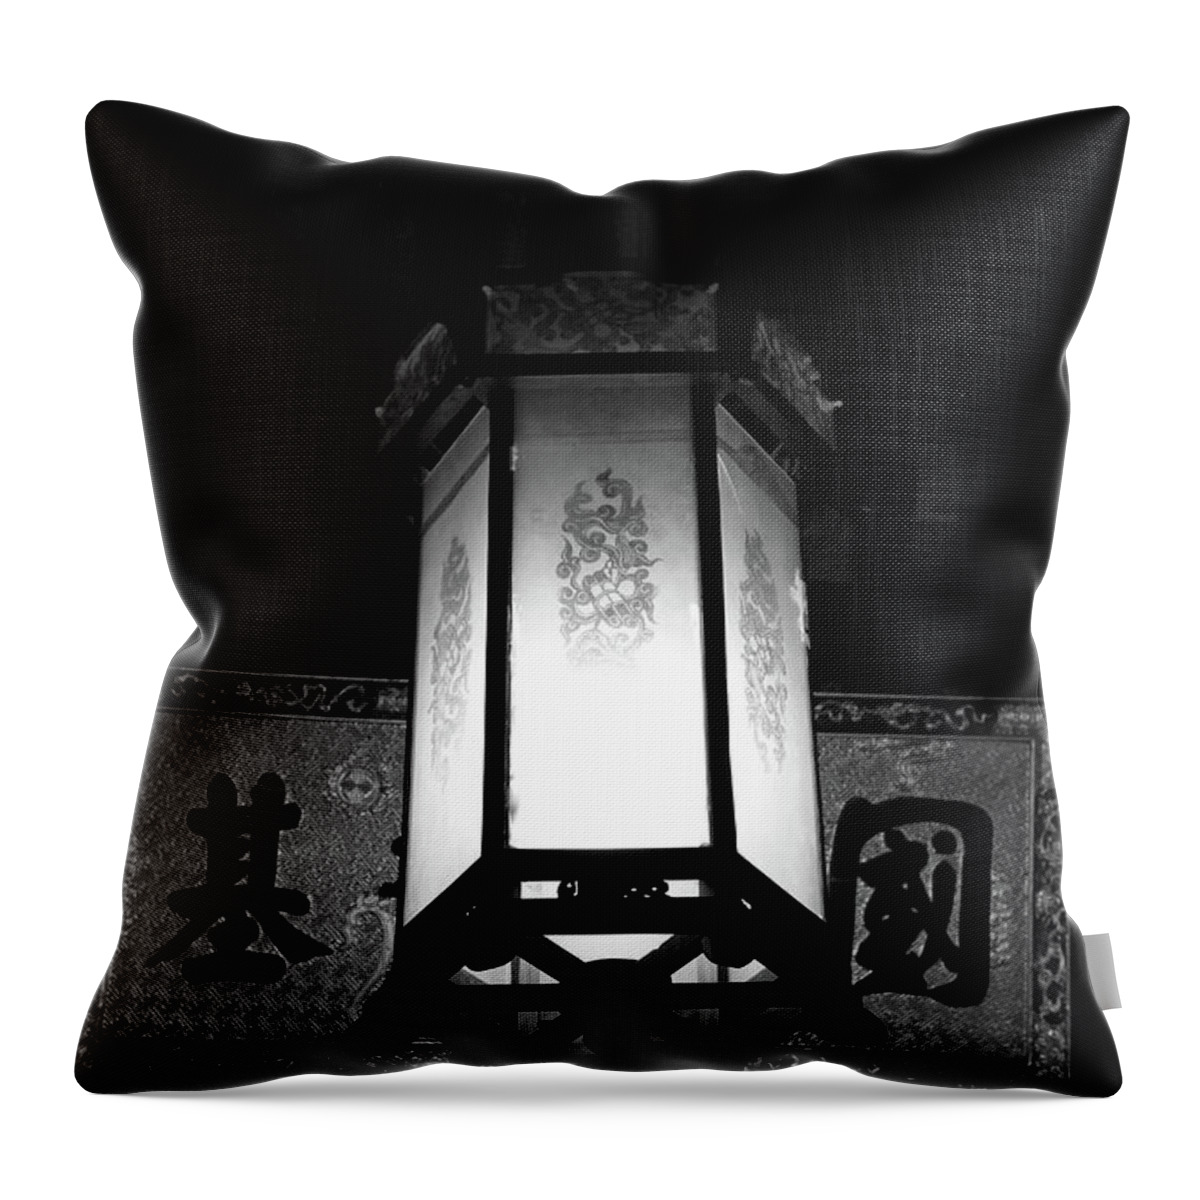 Hue Throw Pillow featuring the photograph Hanging Lantern Hue Vietnam by Samantha Delory